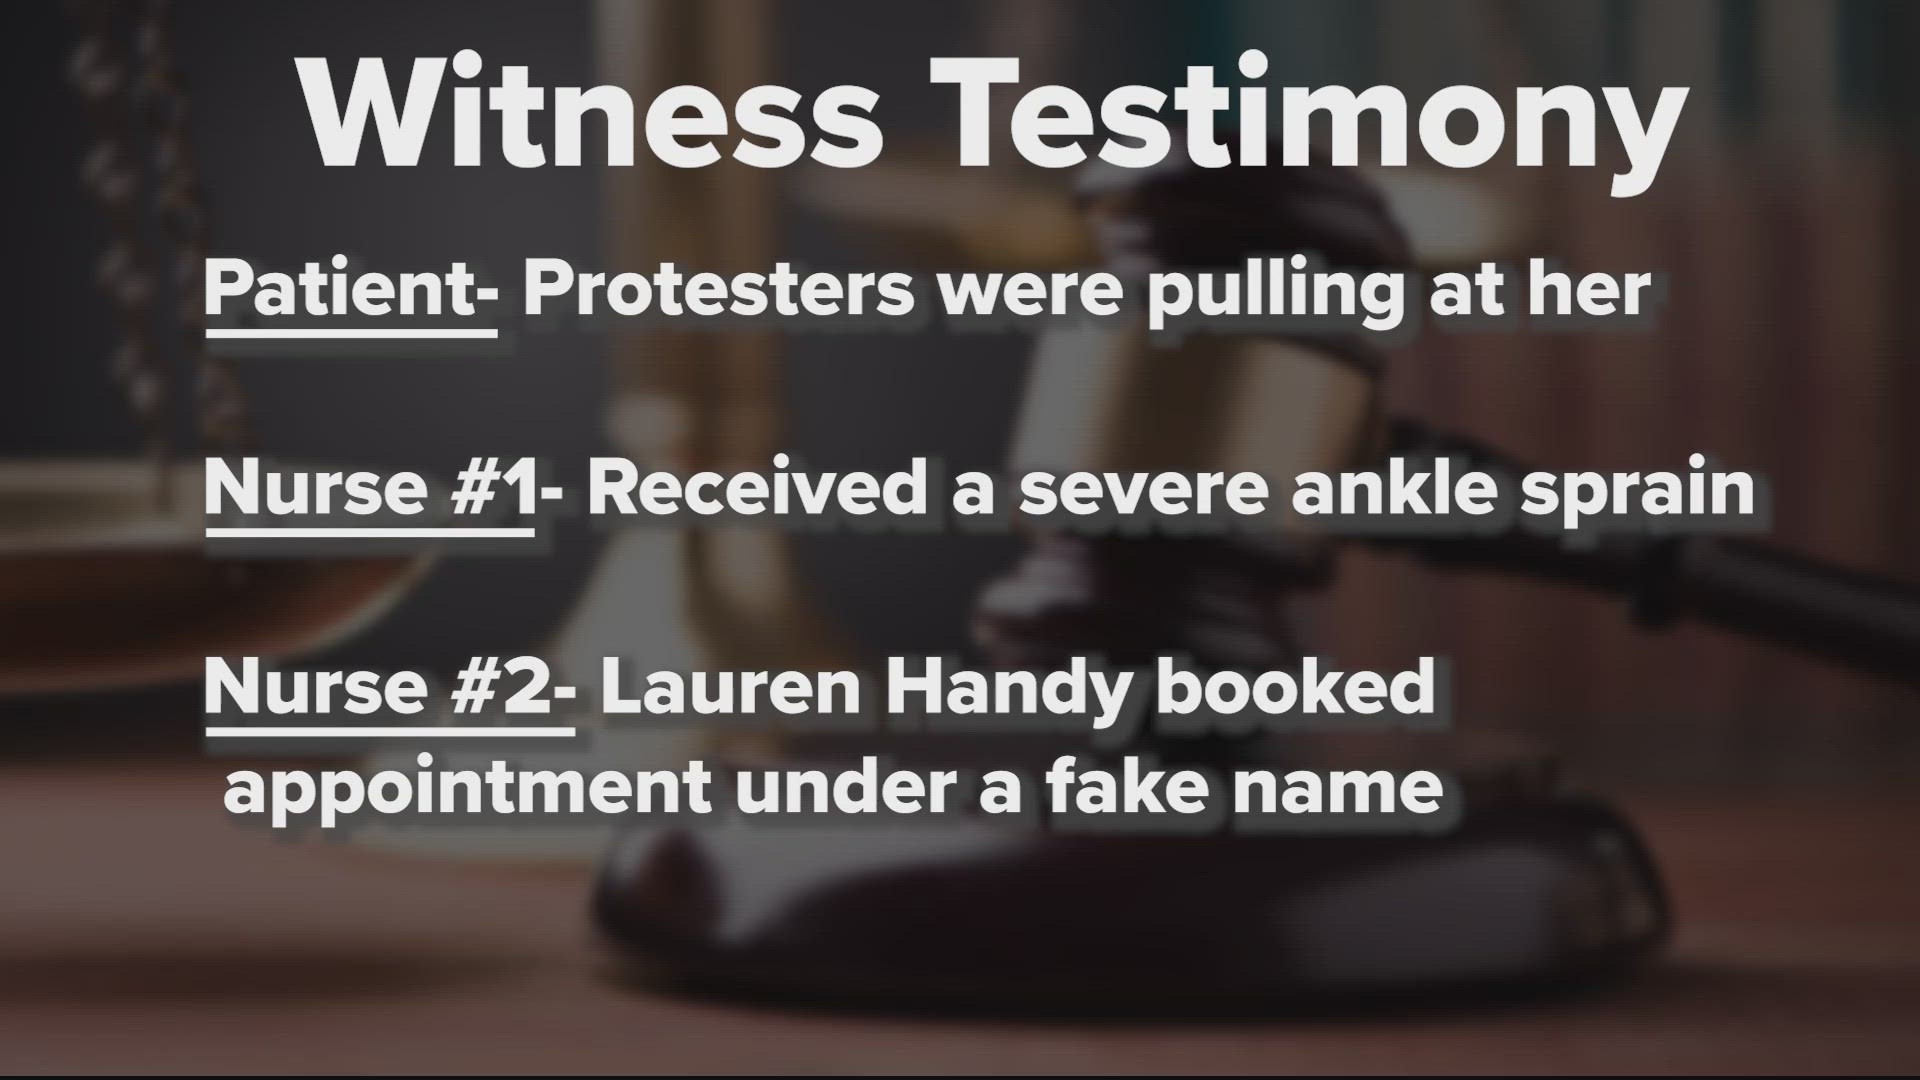 Lauren Handy and her co-defendants collectively have a long history of anti-abortion protests around the country.